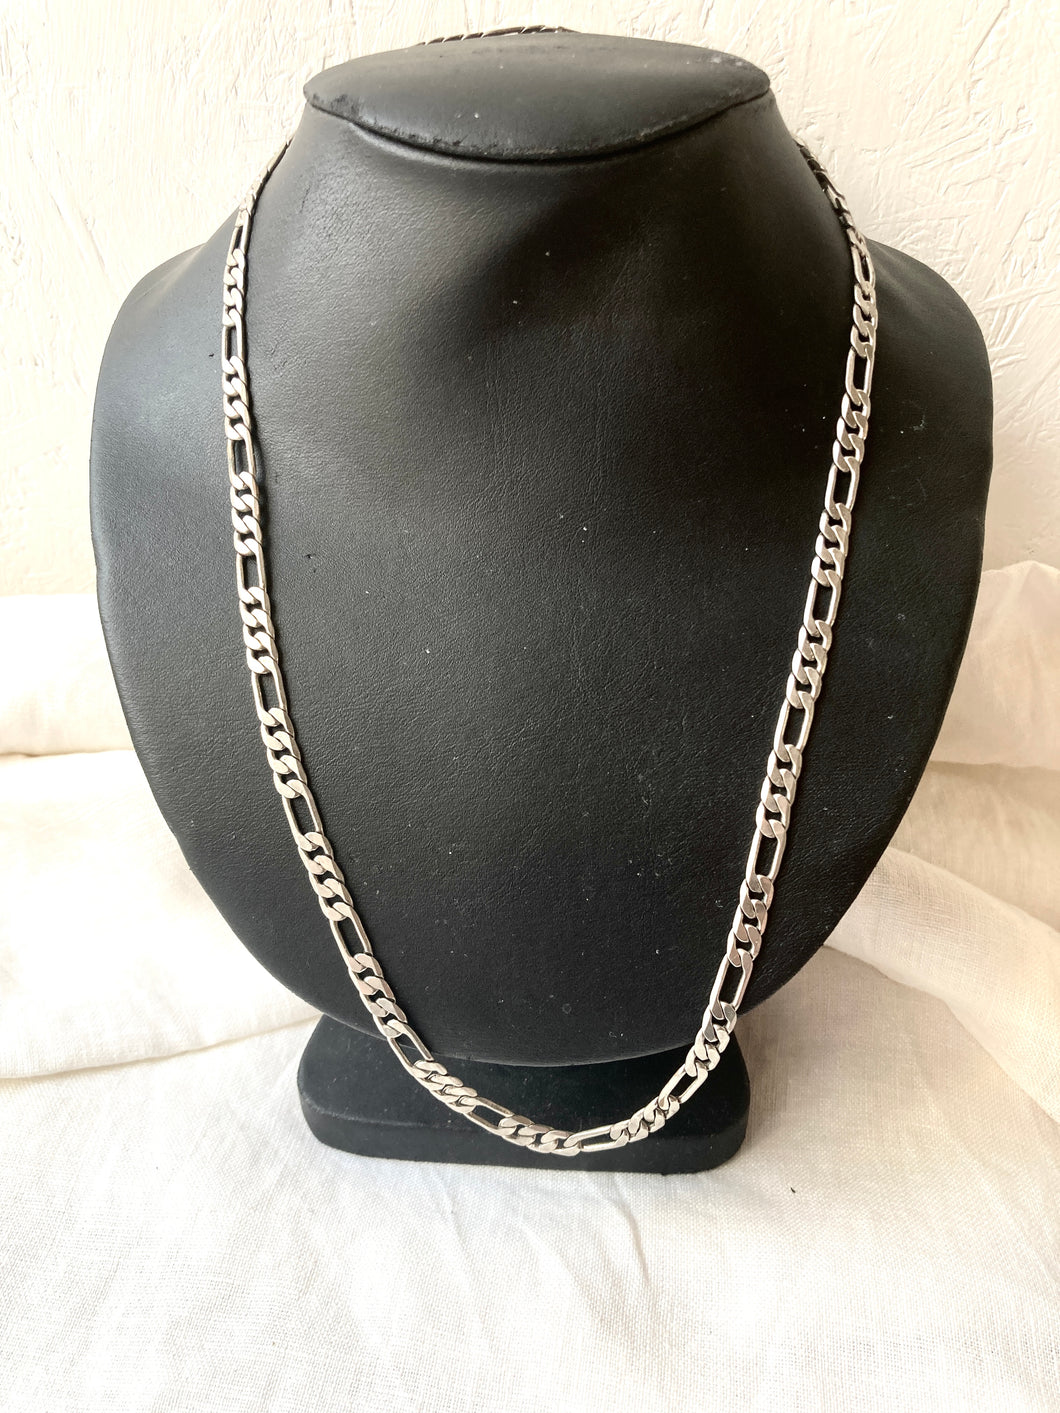 Vintage Silver Heavy Figaro chain, Flat Link Silver toned necklace, Heavy Chain necklace